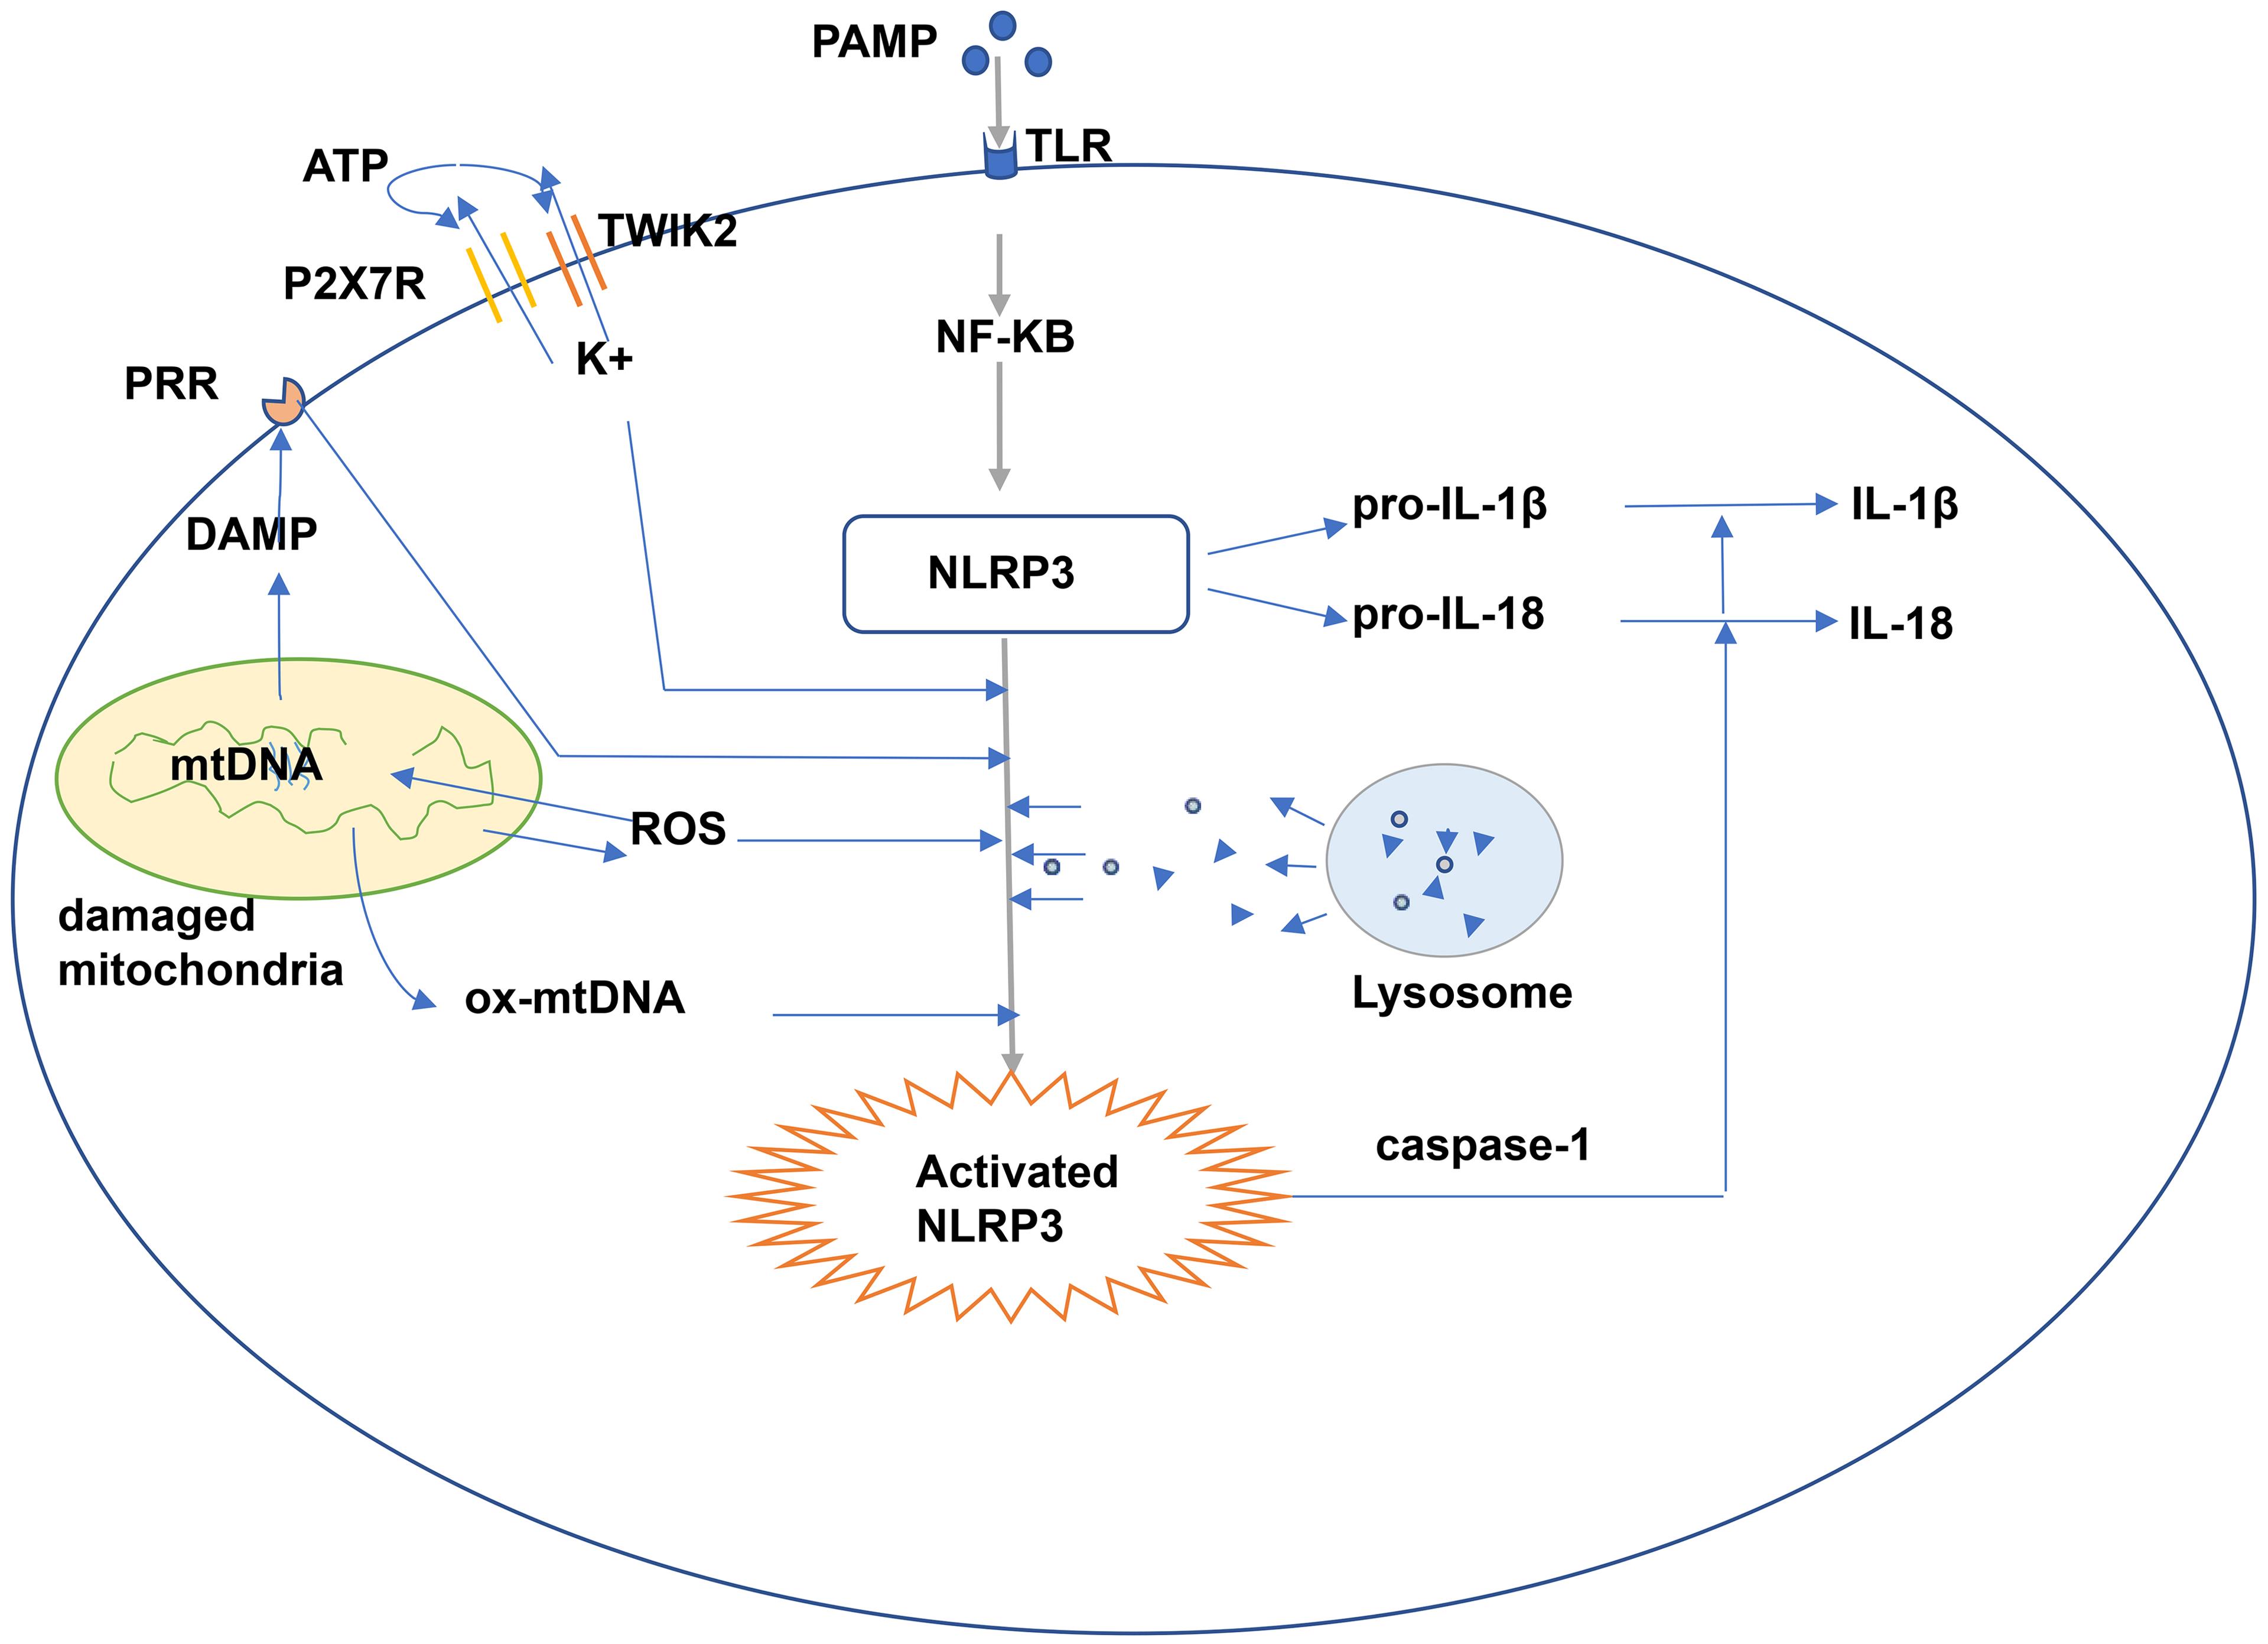 Classical activation of NLRP3.